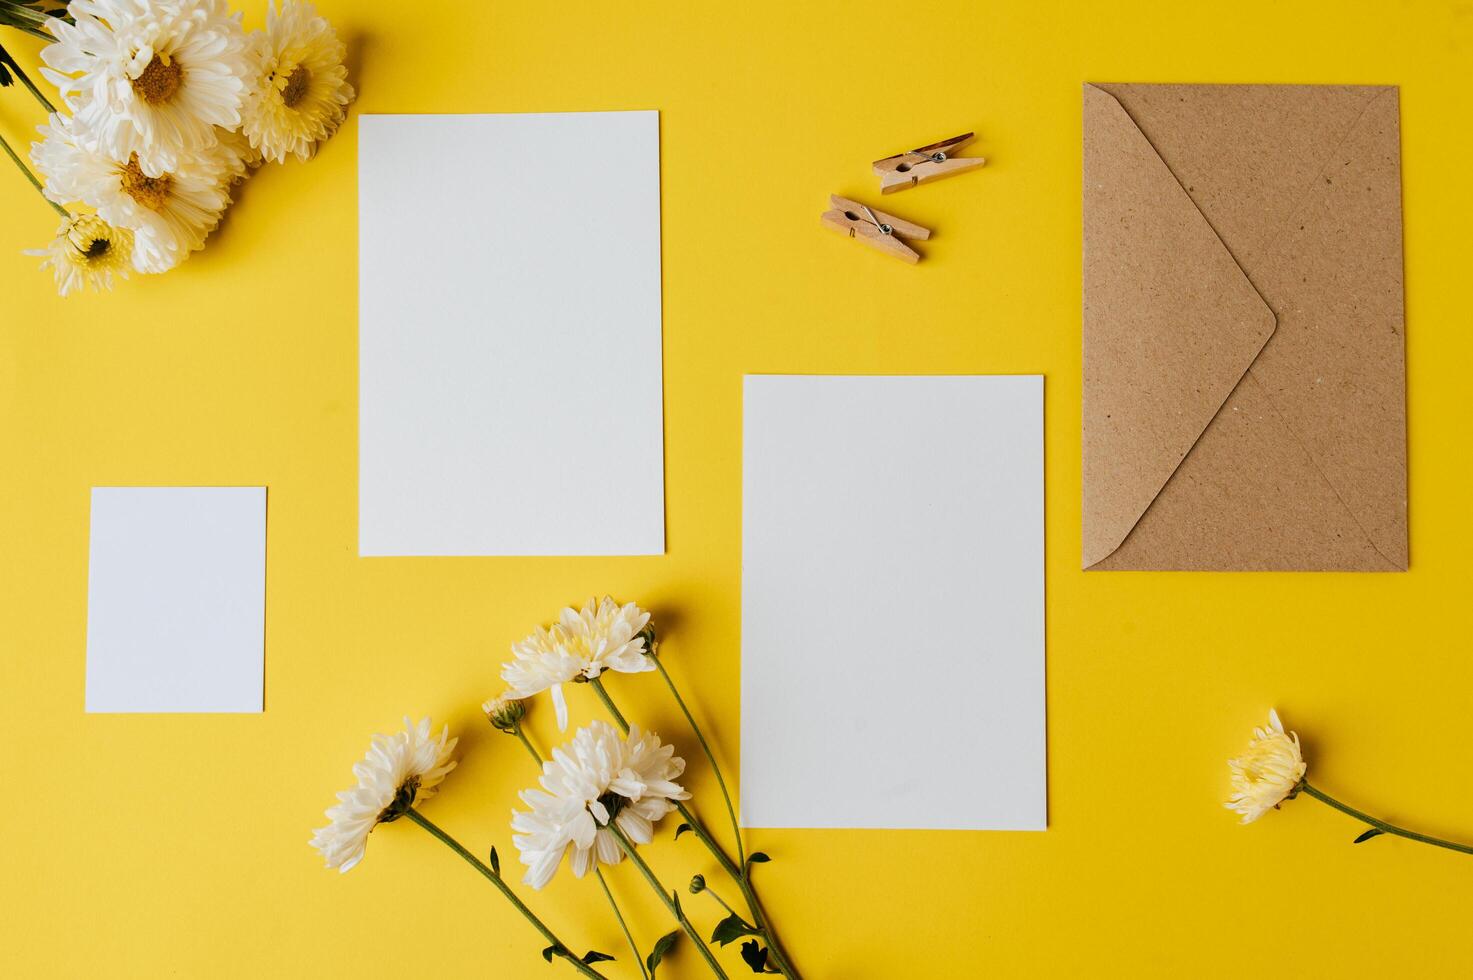 blank card with envelope and flower is placed on yellow background photo